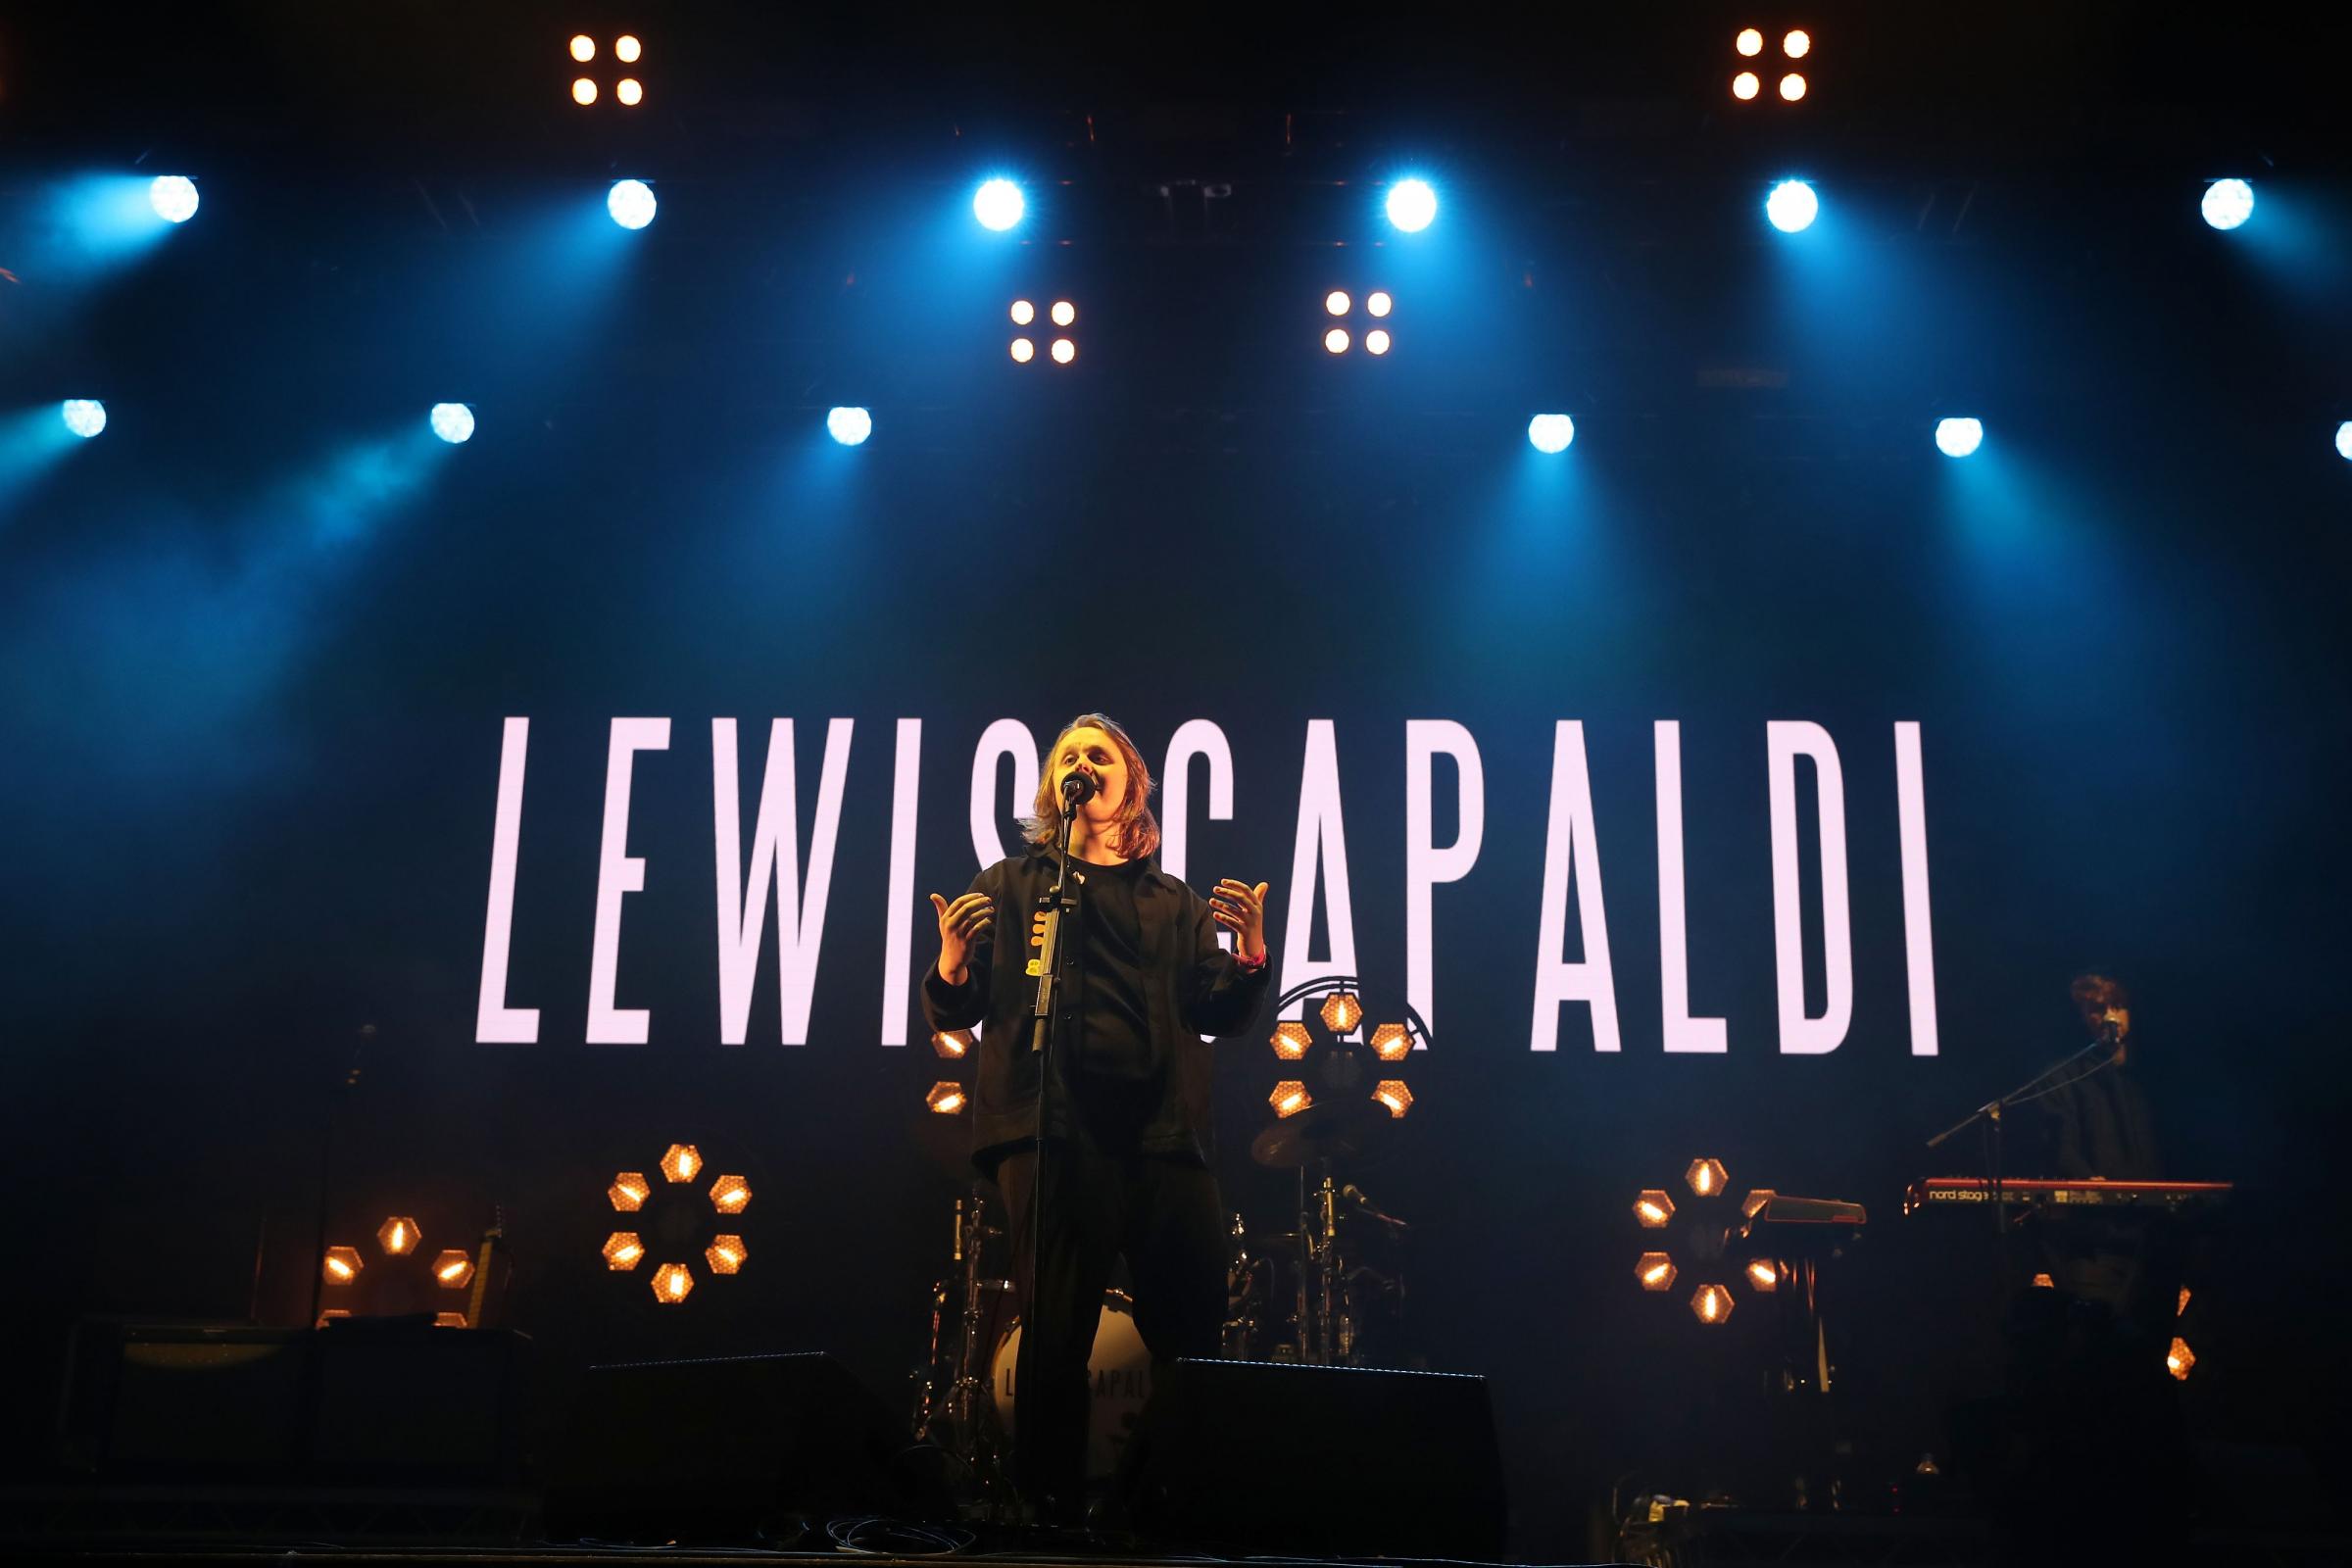 Lewis Capaldi announces 2020 arena tour with anxiety support hotline